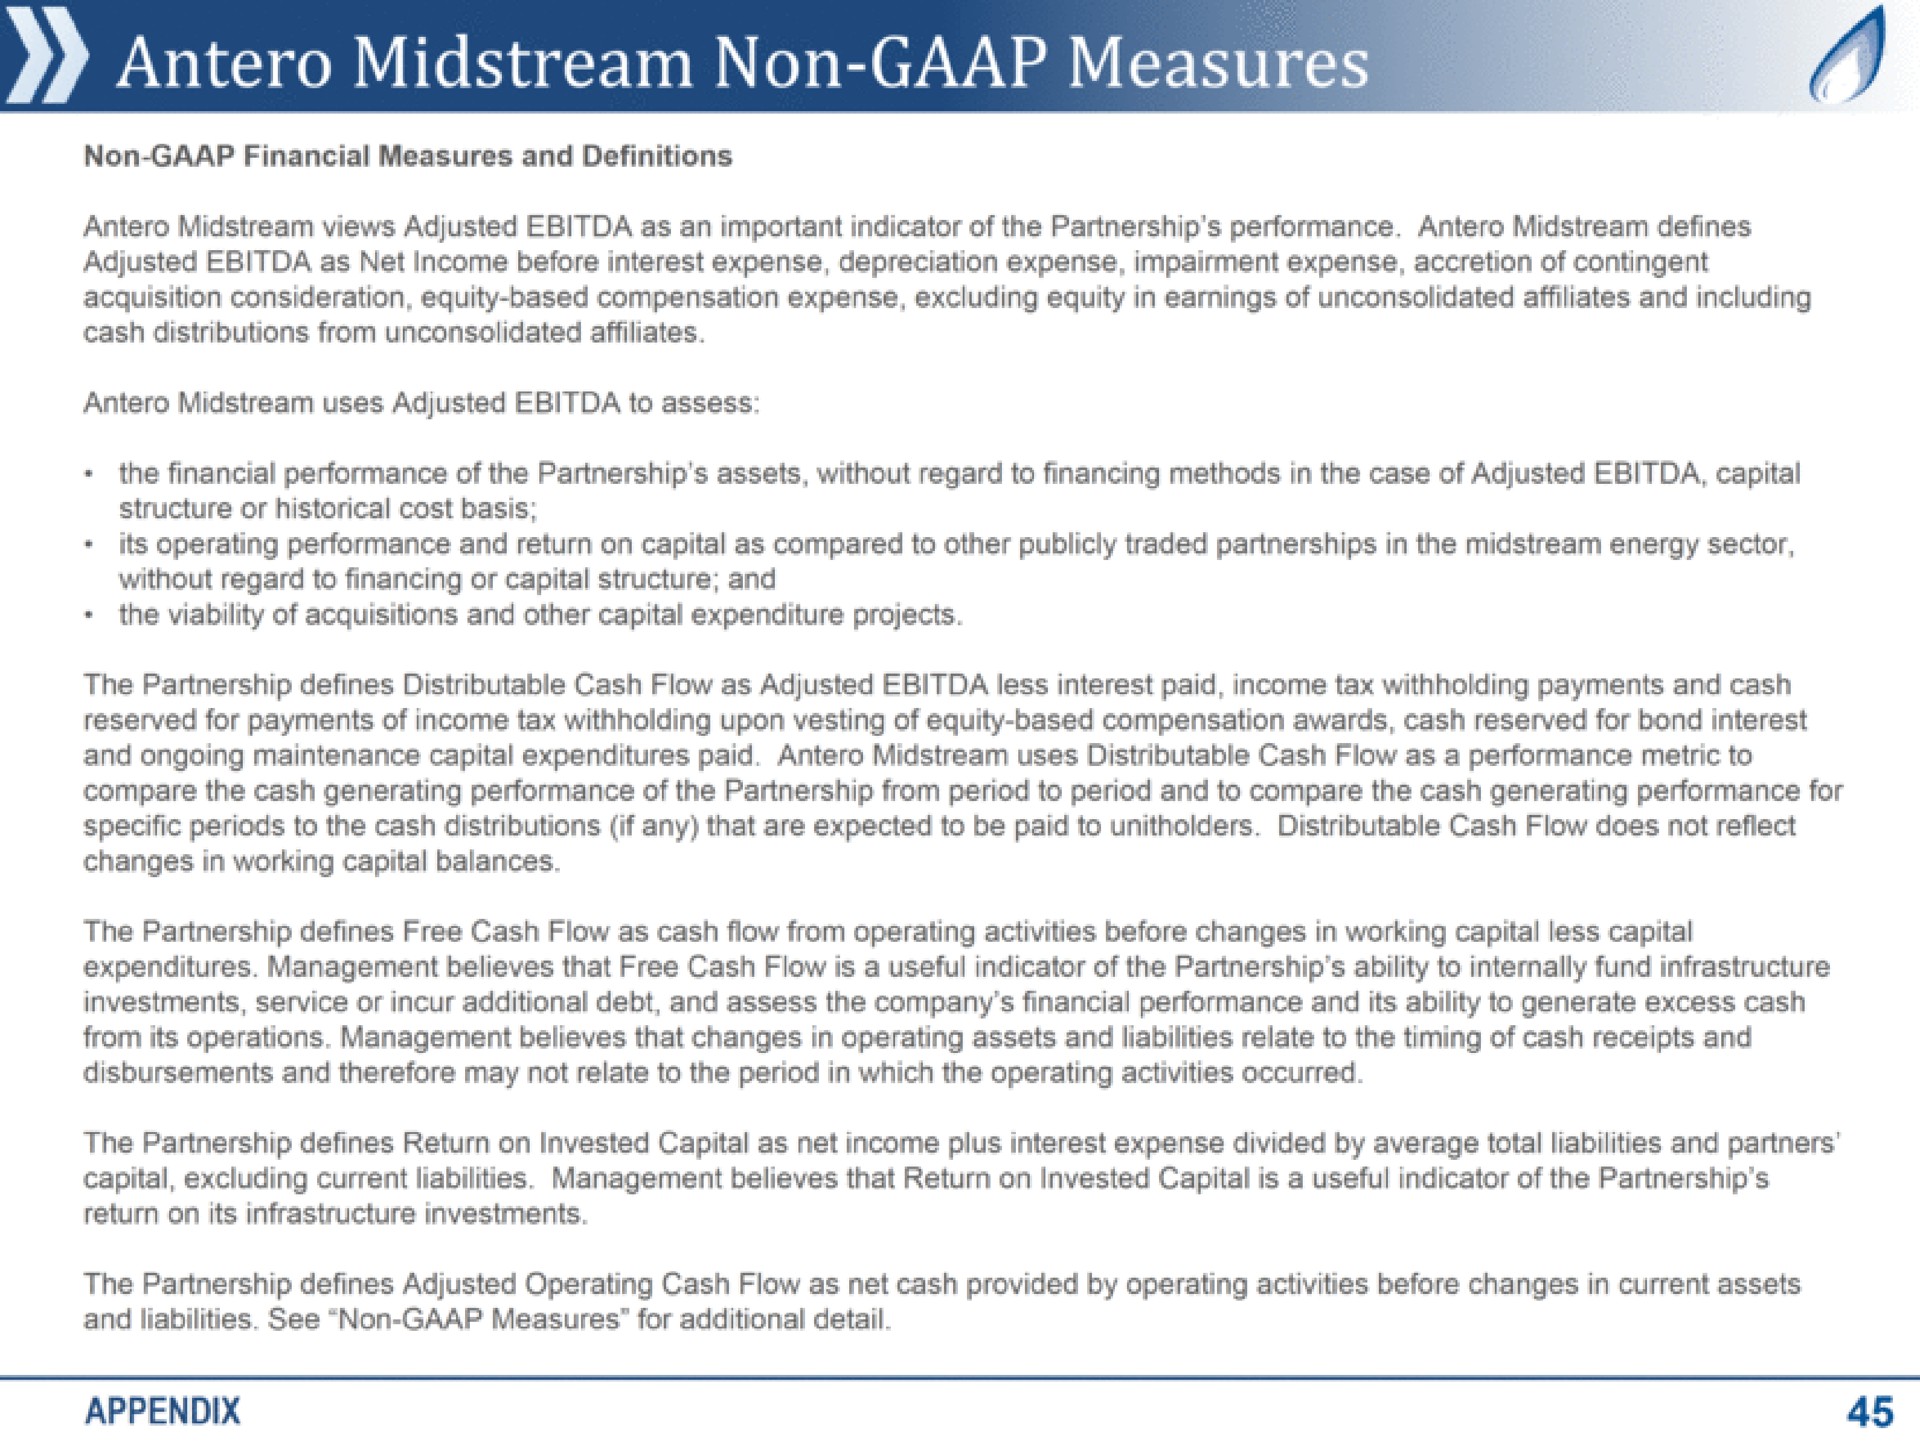 midstream non measures a non financial measures and definitions midstream views adjusted as an important indicator of the partnership performance midstream defines adjusted as net income before interest expense depreciation expense impairment expense accretion of contingent acquisition consideration equity based compensation expense excluding equity in earnings of unconsolidated affiliates and including cash distributions from unconsolidated affiliates midstream uses adjusted to assess the financial performance of the partnership assets without regard to financing methods in the case of adjusted capital structure or historical cost basis its operating performance and return on capital as compared to other publicly traded partnerships in the midstream energy sector without regard to financing or capital structure and the viability of acquisitions and other capital expenditure projects the partnership defines distributable cash flow as adjusted less interest paid income tax withholding payments and cash reserved for payments of income tax withholding upon vesting of equity based compensation awards cash reserved for bond interest and ongoing maintenance capital expenditures paid midstream uses distributable cash flow as a performance metric to compare the cash generating performance of the partnership from period to period and to compare the cash generating performance for specific periods to the cash distributions if any that are expected to be paid to distributable cash flow does not reflect changes in working capital balances the partnership defines free cash flow as cash flow from operating activities before changes in working capital less capital expenditures management believes that free cash flow is a useful indicator of the partnership ability to internally fund infrastructure investments service or incur additional debt and assess the company financial performance and its ability to generate excess cash from its operations management believes that changes in operating assets and liabilities relate to the timing of cash receipts and disbursements and therefore may not relate to the period in which the operating activities occurred the partnership defines return on invested capital as net income plus interest expense divided by average total liabilities and partners capital excluding current liabilities management believes that return on invested capital is a useful indicator of the partnership return on its infrastructure investments the partnership defines adjusted operating cash flow as net cash provided by operating activities before changes in current assets and liabilities see non measures for additional detail appendix | Antero Midstream Partners